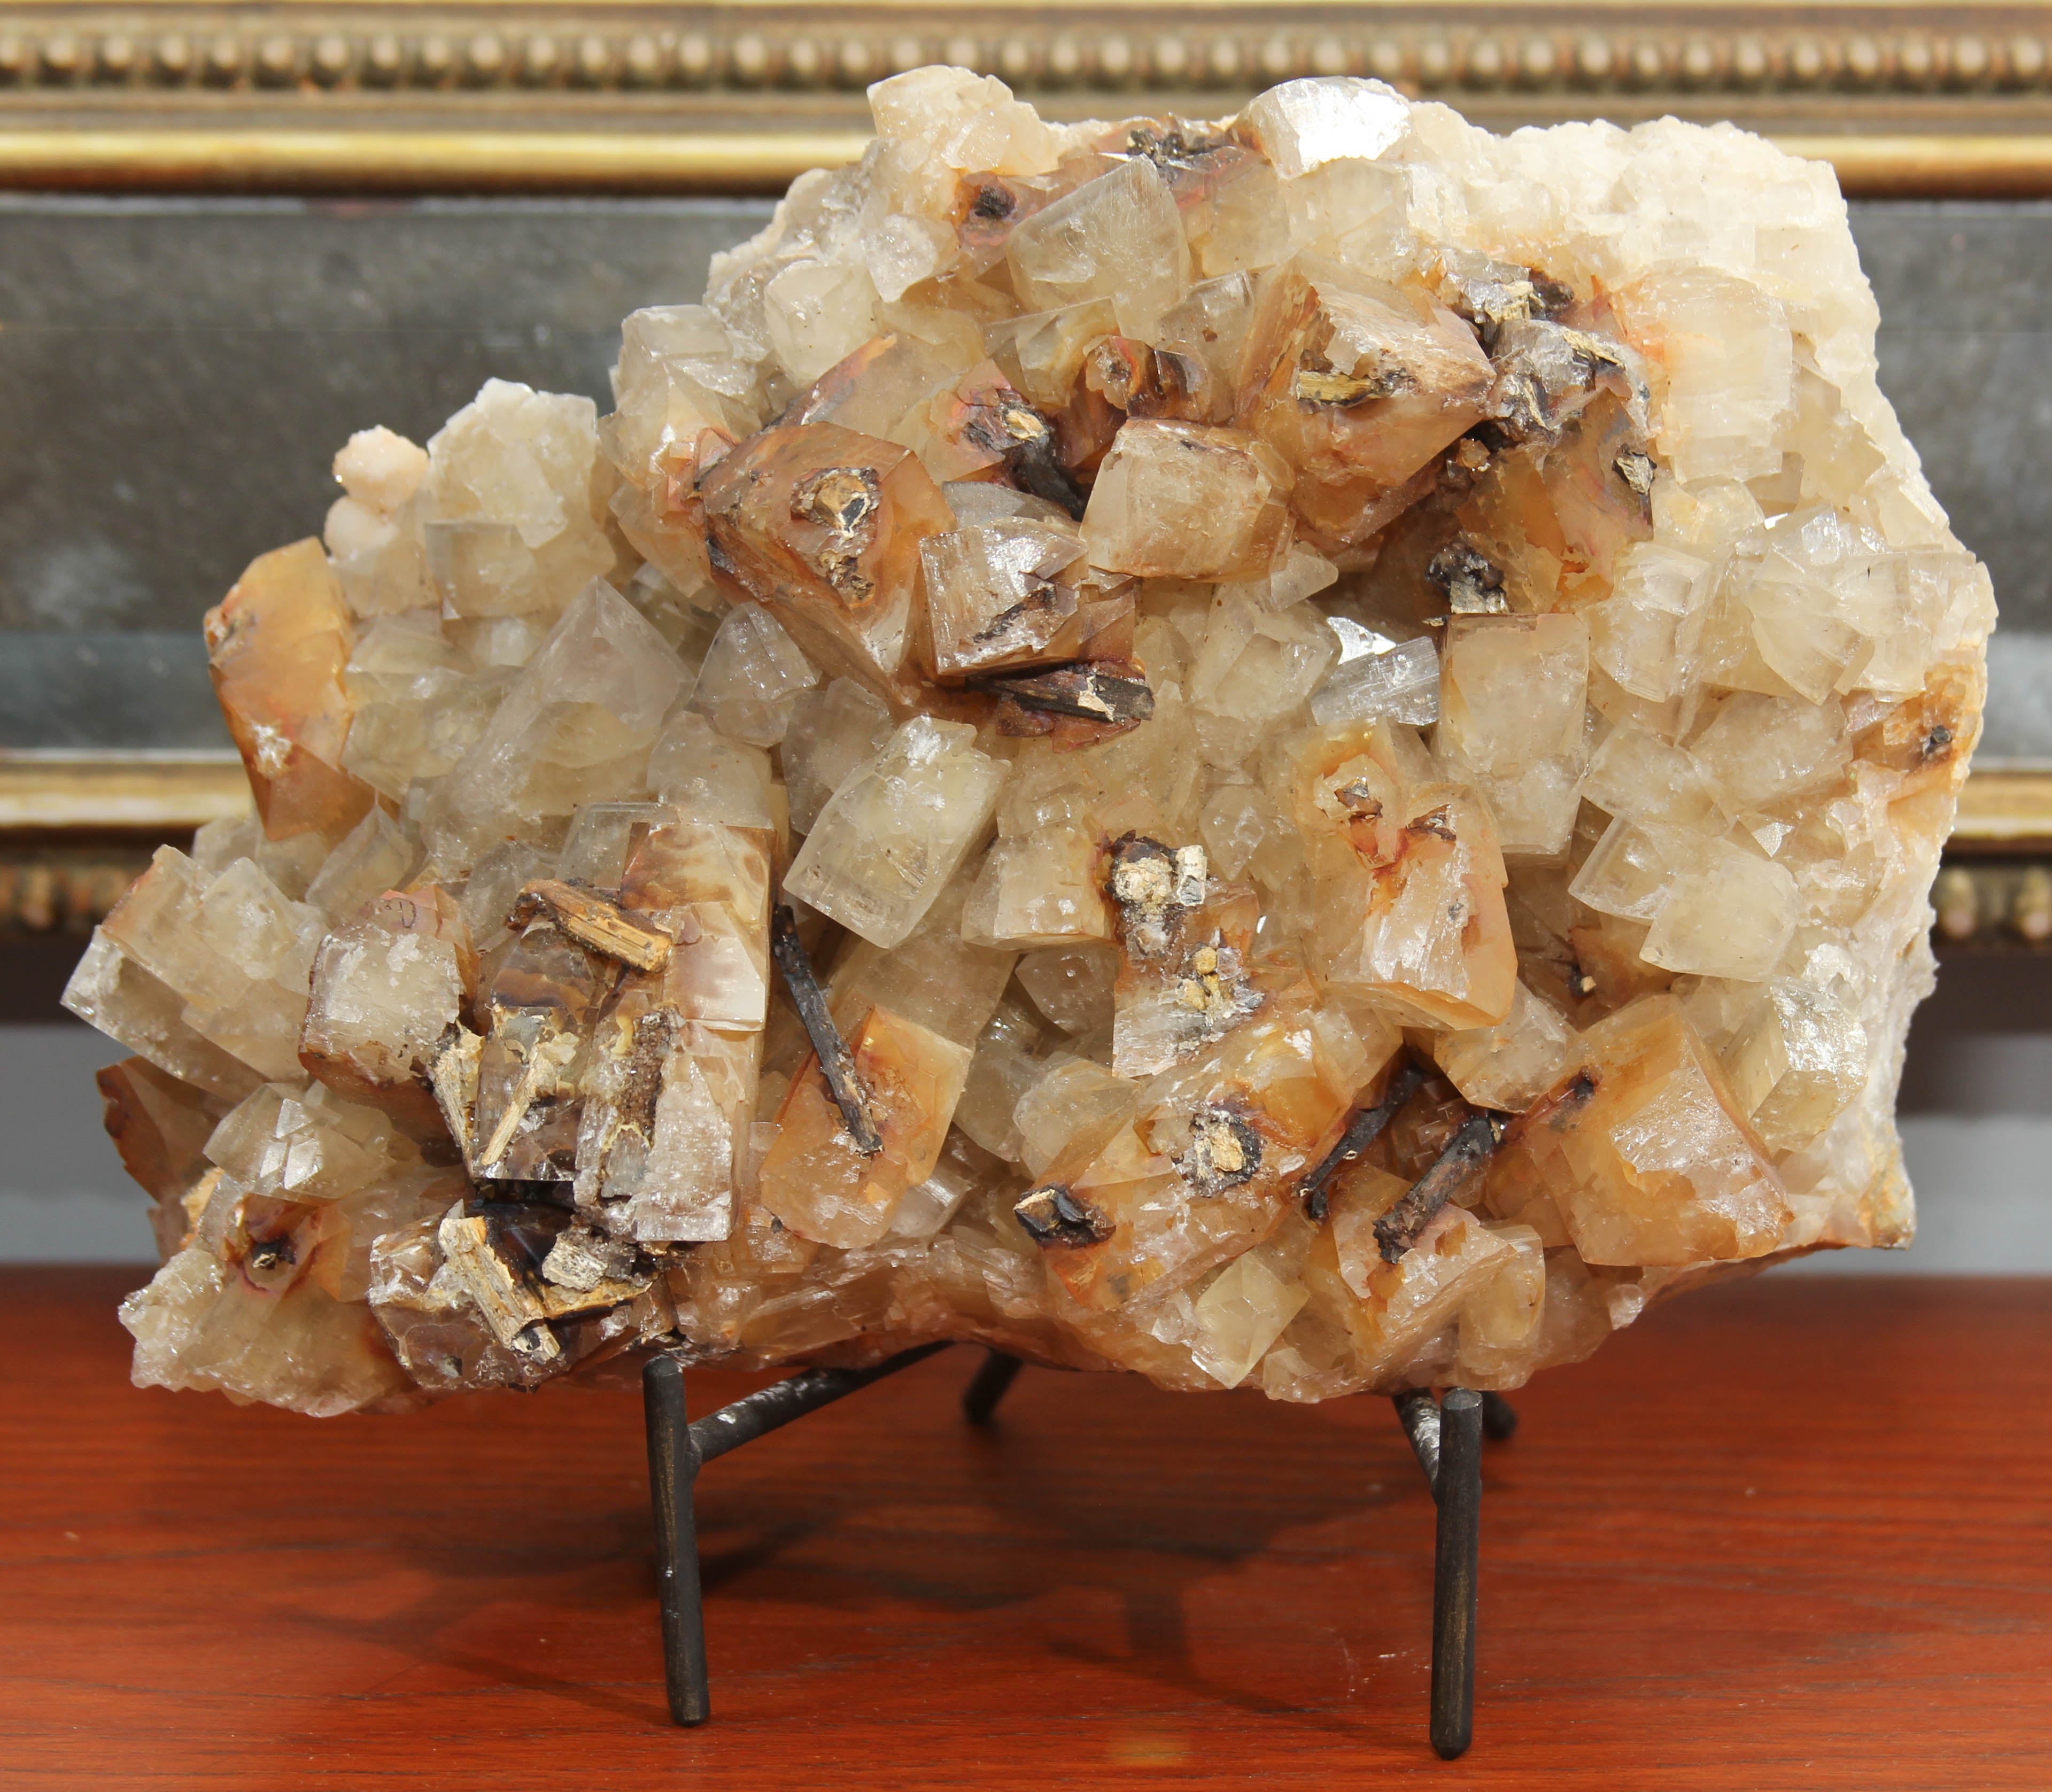 Handsome natural crystal specimen with stand. This can sit flat or sit within the stand. Perfect on a shelf or tabletop.